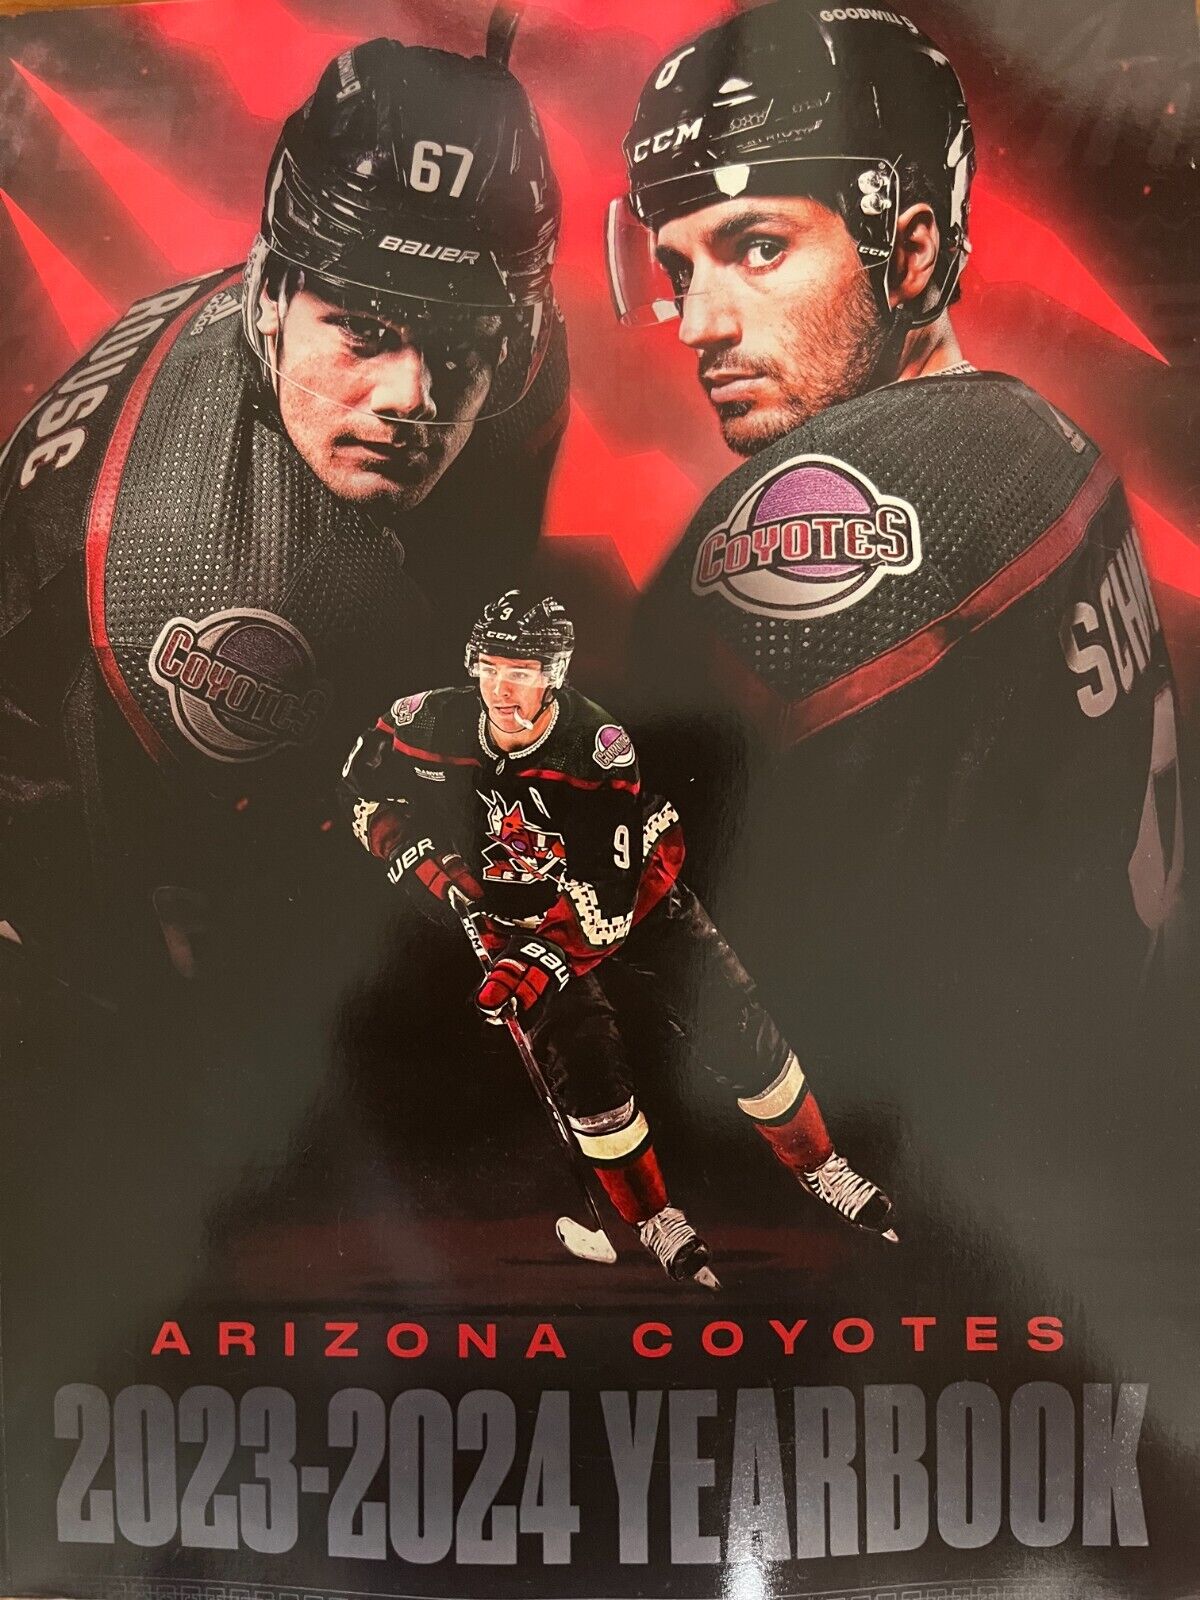 2023 2024 ARIZONA COYOTES YEARBOOK NHL HOCKEY FINAL EDITION SCARCE 90 PAGES